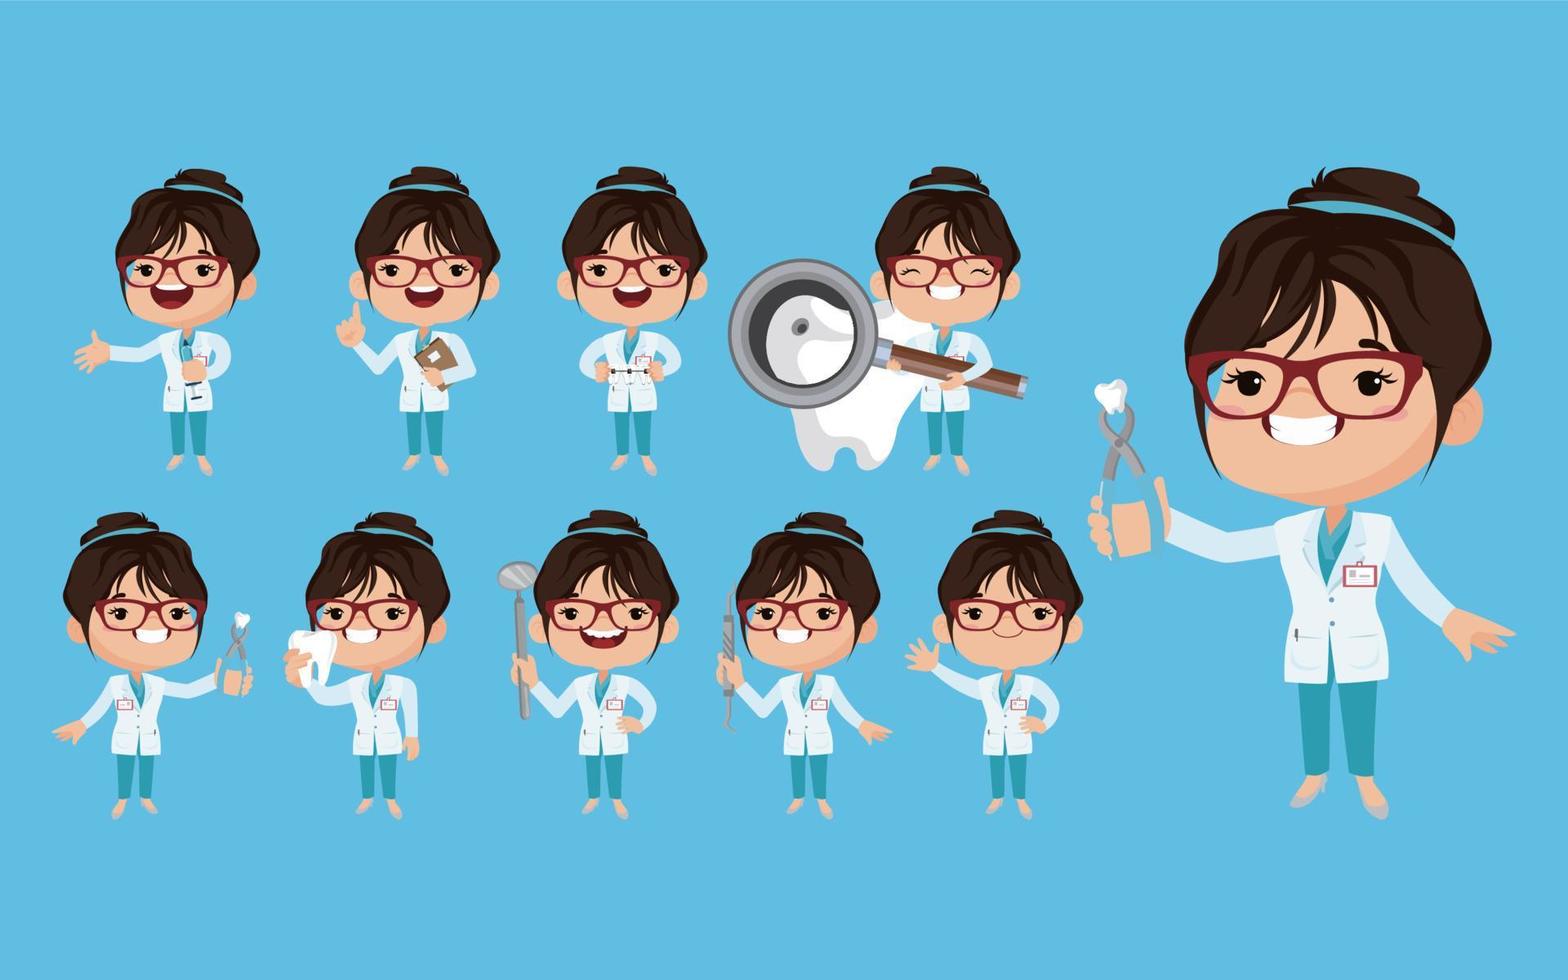 Dentist character and dental care concept vector